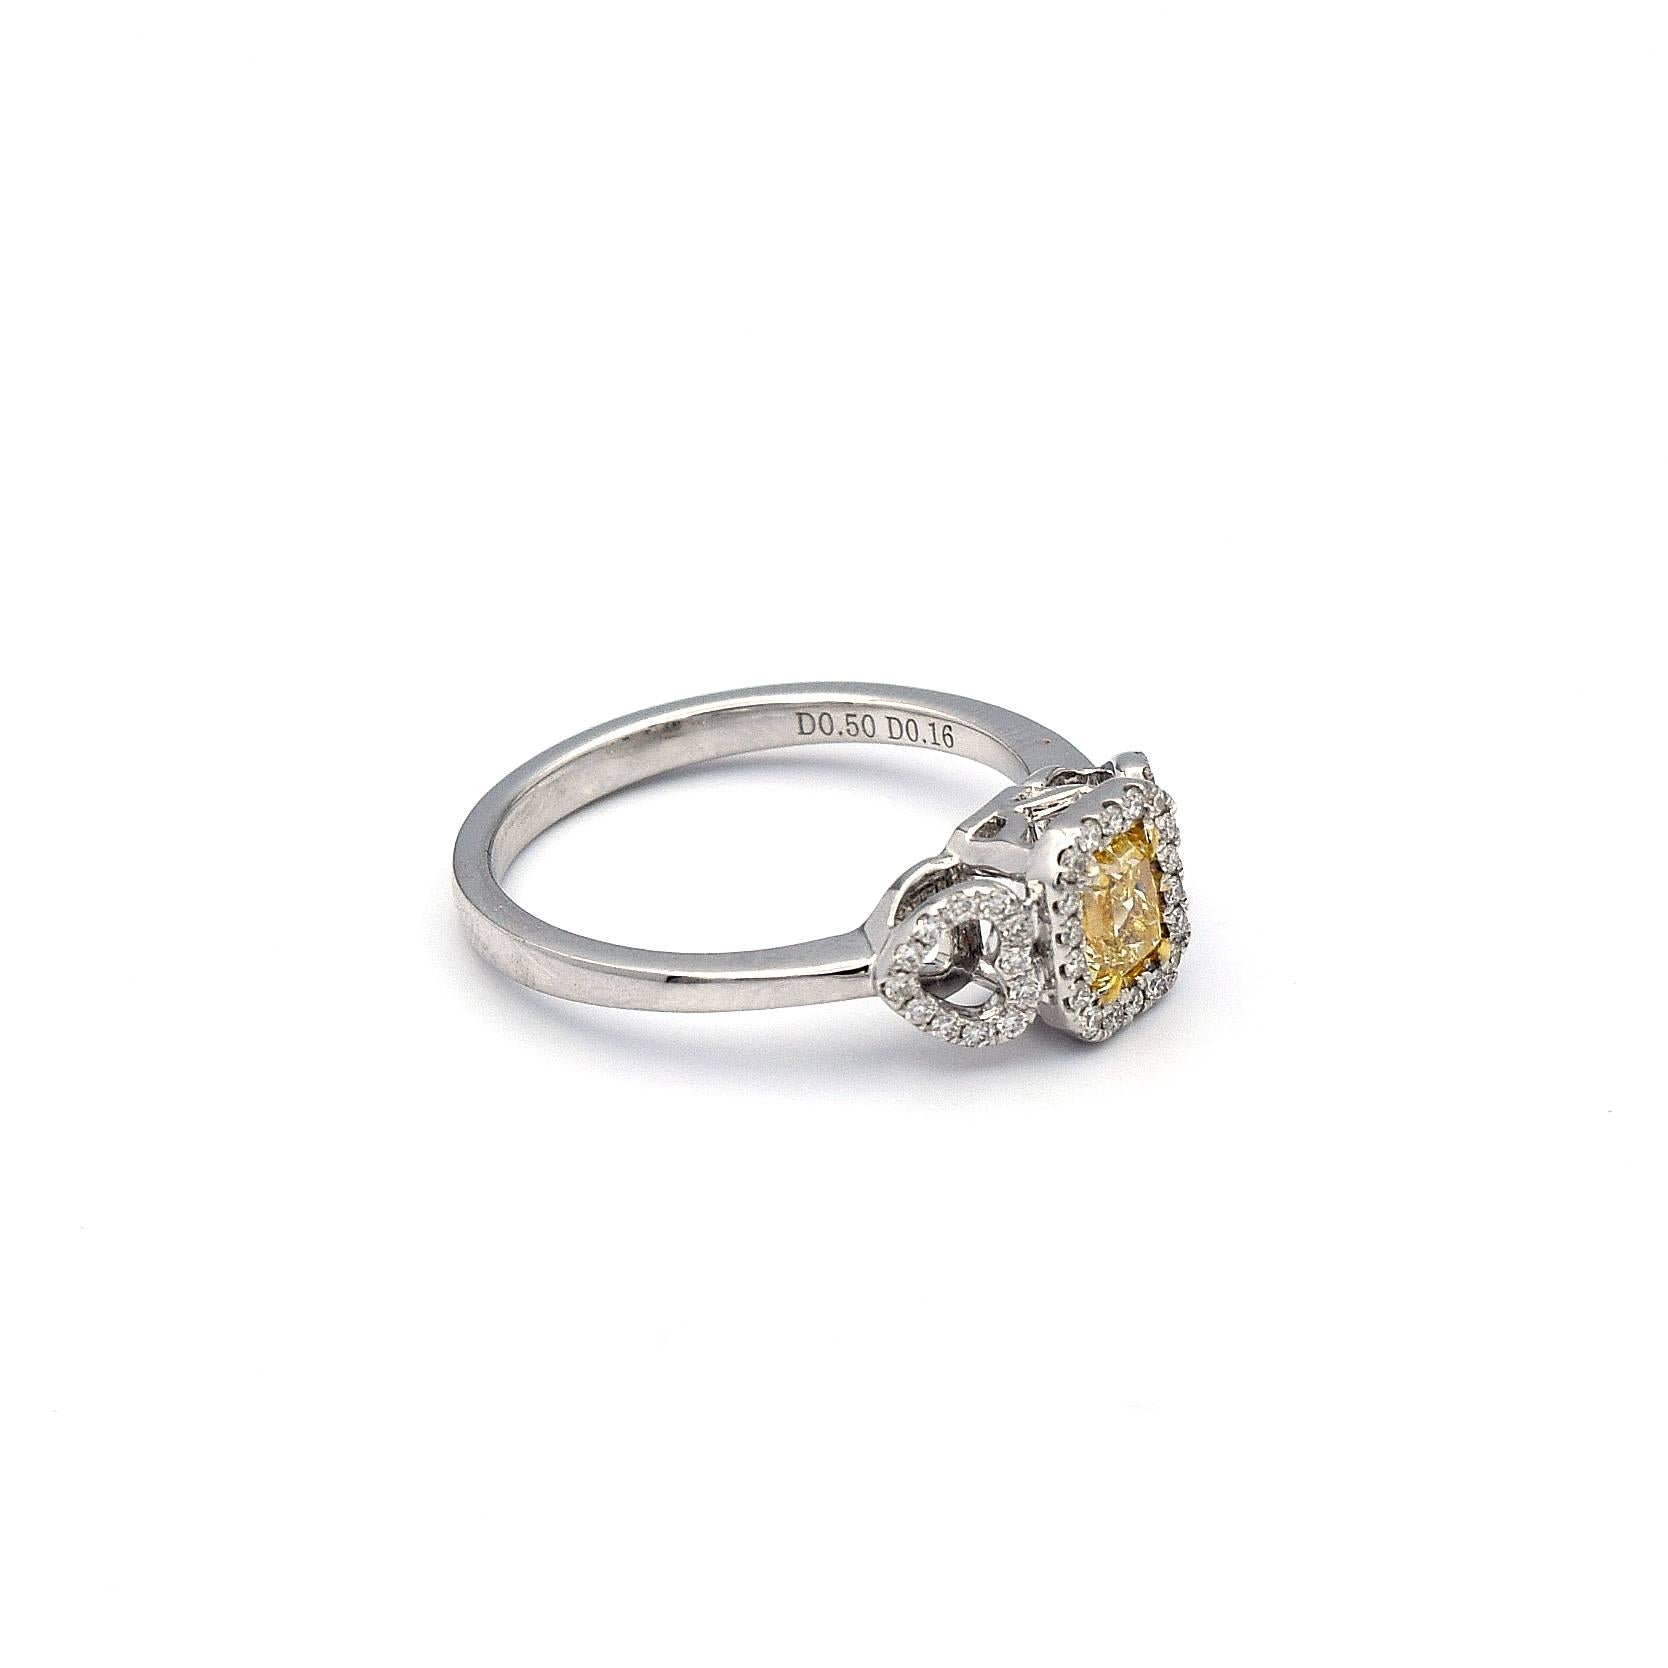 This charming ring has a 0.50ct Radiant cut Natural Yellow Diamond with 42 white pave diamonds weighting 0.16ct.

This ring is mounted in 18K White Gold, with two side heart shapes, giving it a total weight of 3.41 grams.

Ring size 6